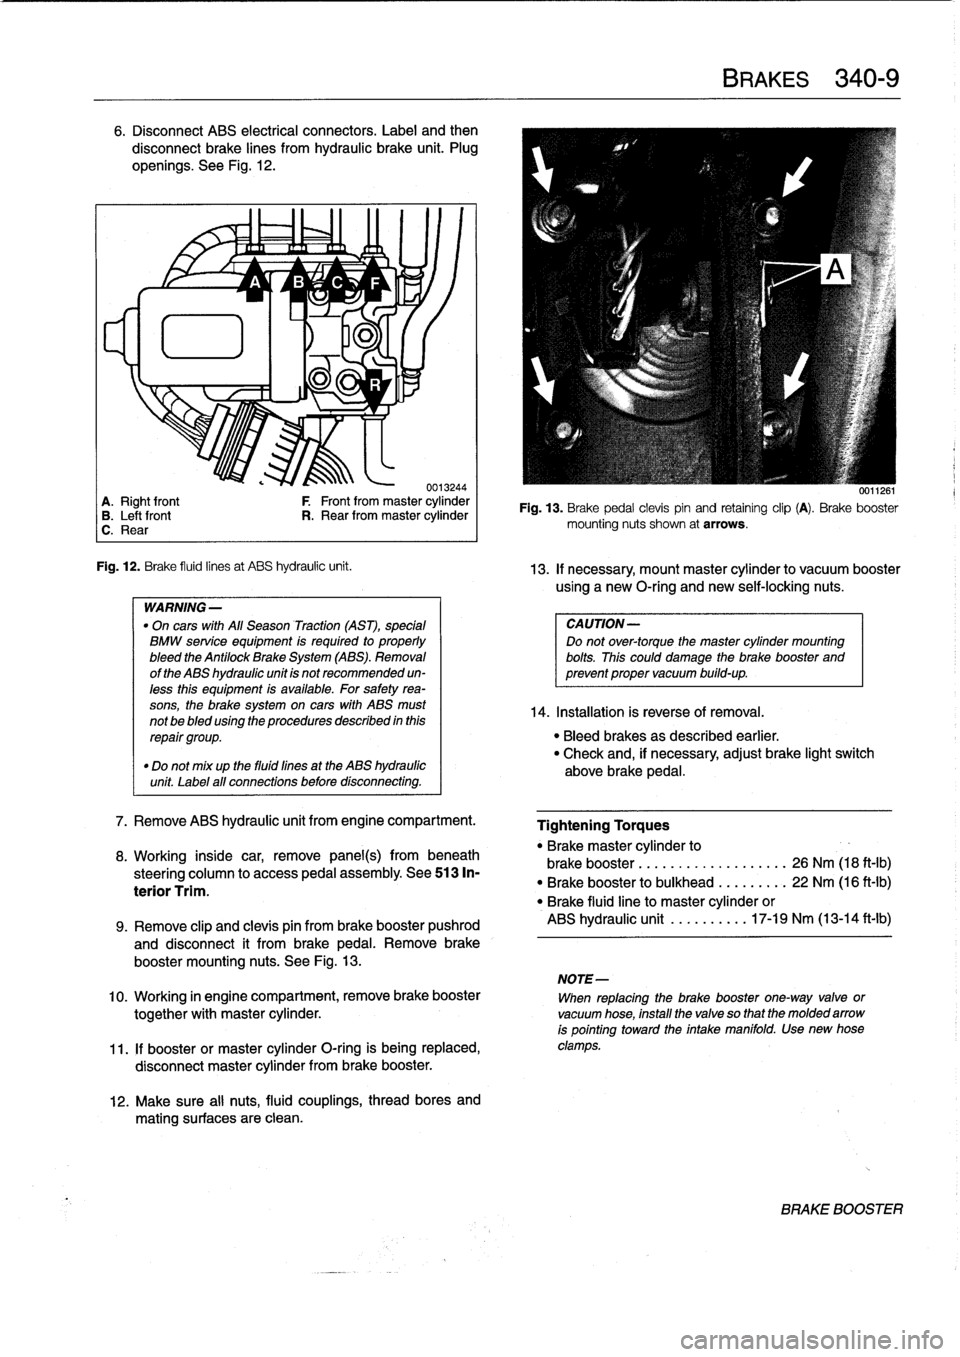 BMW 328i 1994 E36 Owners Guide 6
.
Disconnect
ABS
electrical
connectors
.
Label
and
then

disconnect
brake
lines
from
hydraulic
brake
unit
.
Plug

openíngs
.
See
Fig
.
12
.

~
~
A
1/
B
1v
C
~
F

lu
11
-ri
J
.

0013244
A
.
Right
f